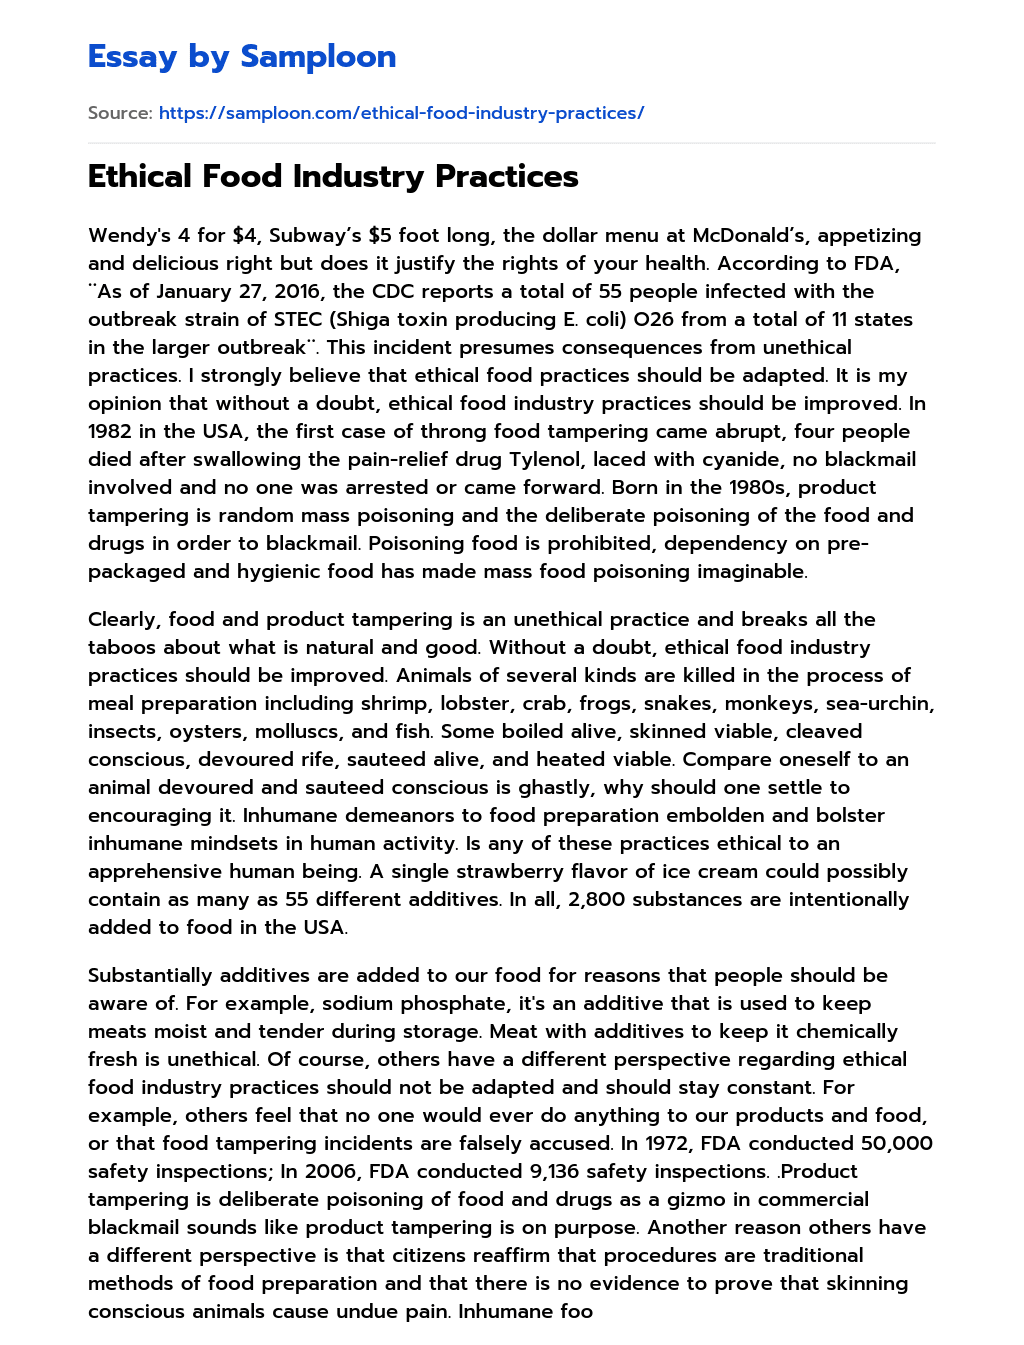 Ethical Food Industry Practices essay